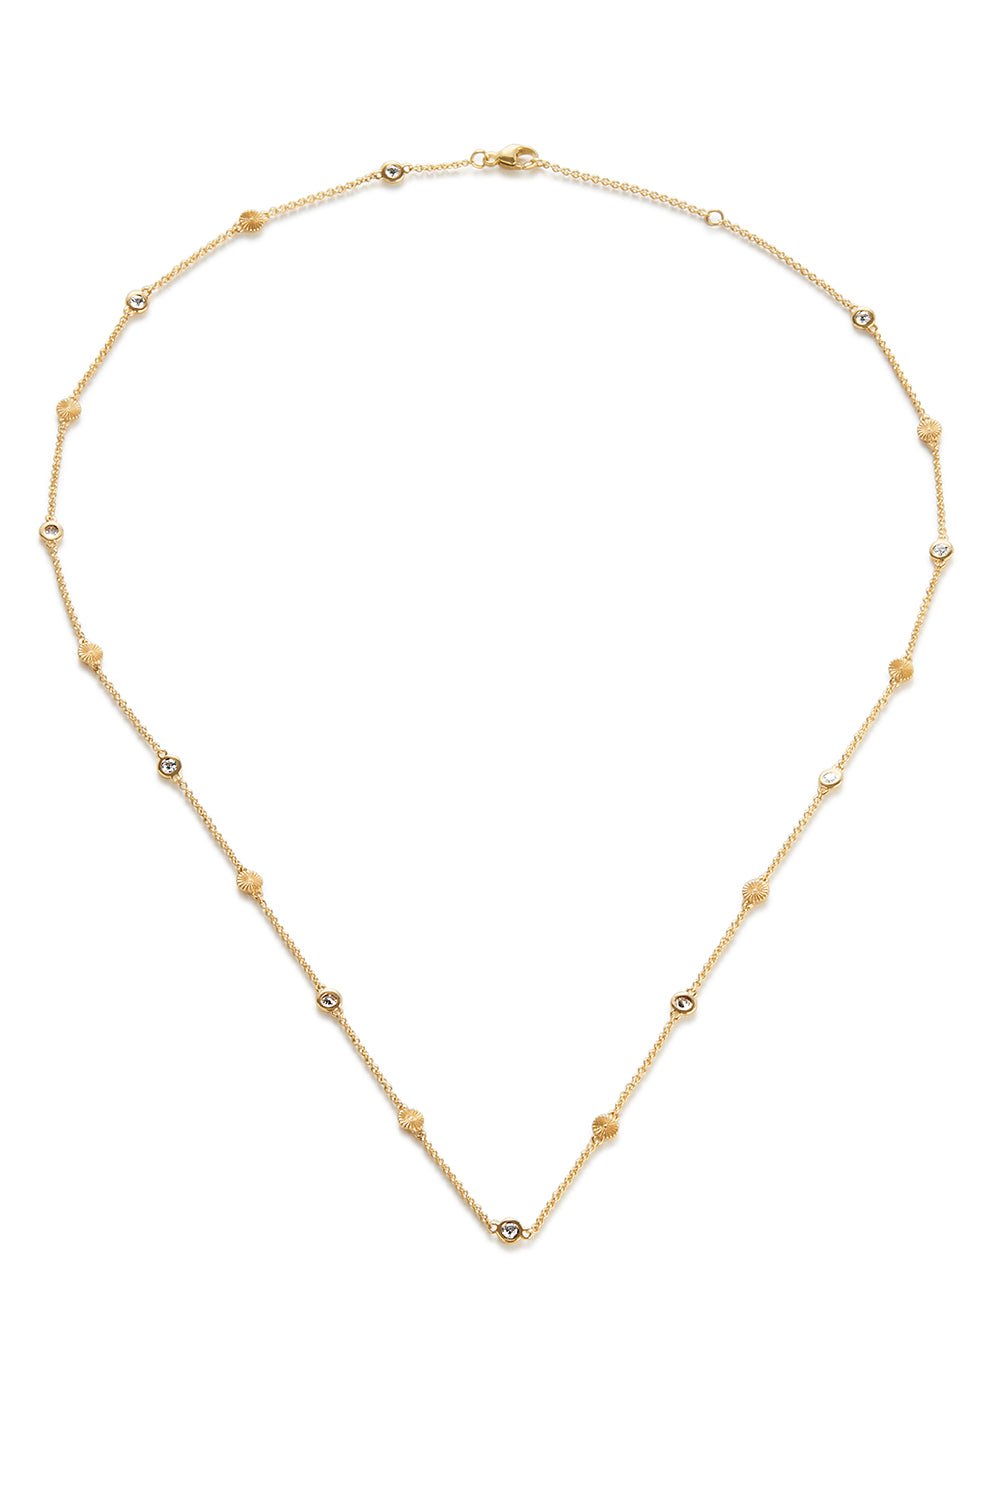 GWEN BELOTI COLLECTION-ESSENCE BEZEL AND PRISM CHARM DIAMOND NECKLACE-YELLOW GOLD